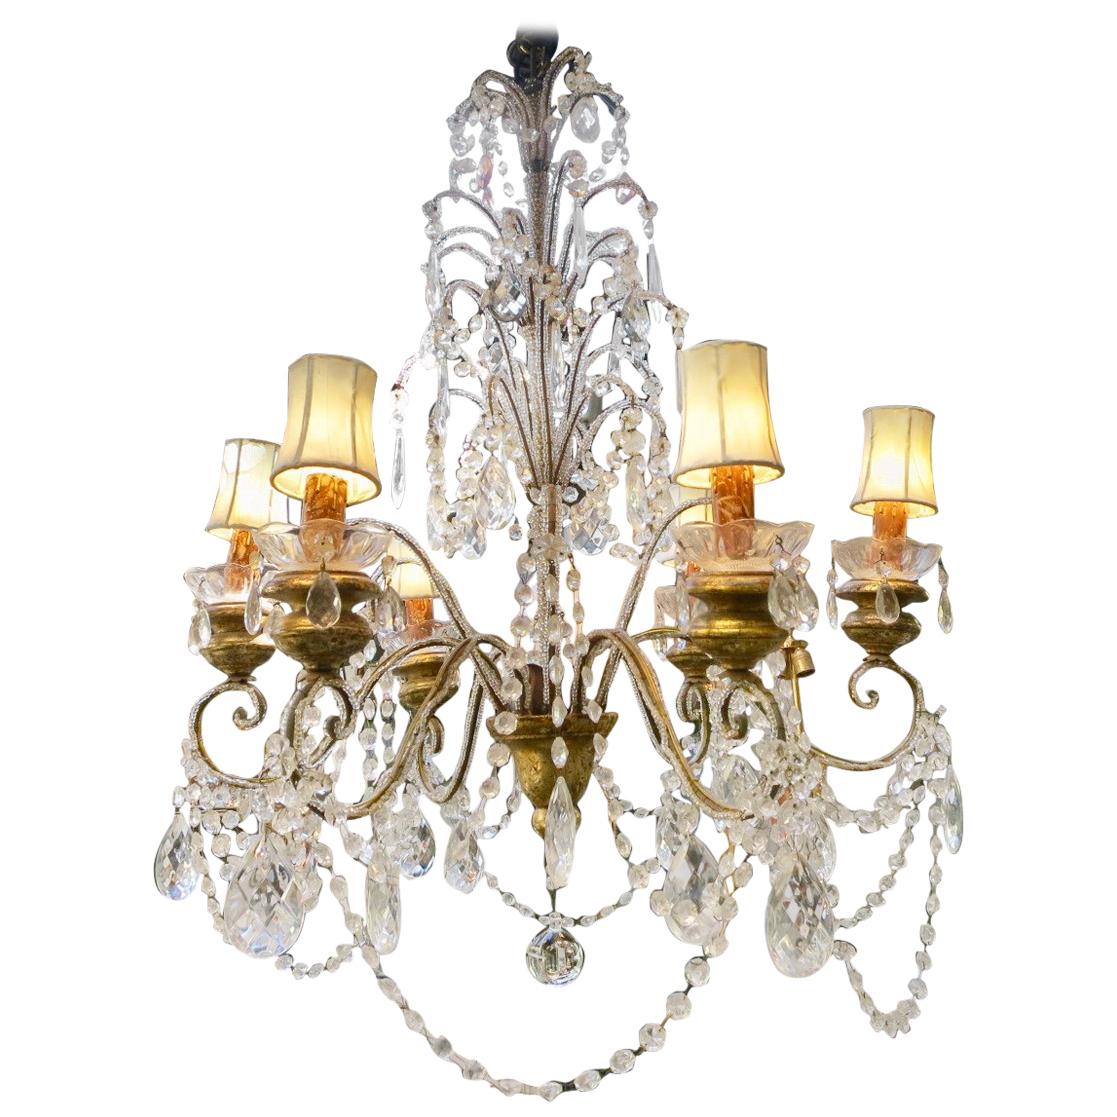 A Pair Of Florentine Italian Chandeliers For Sale